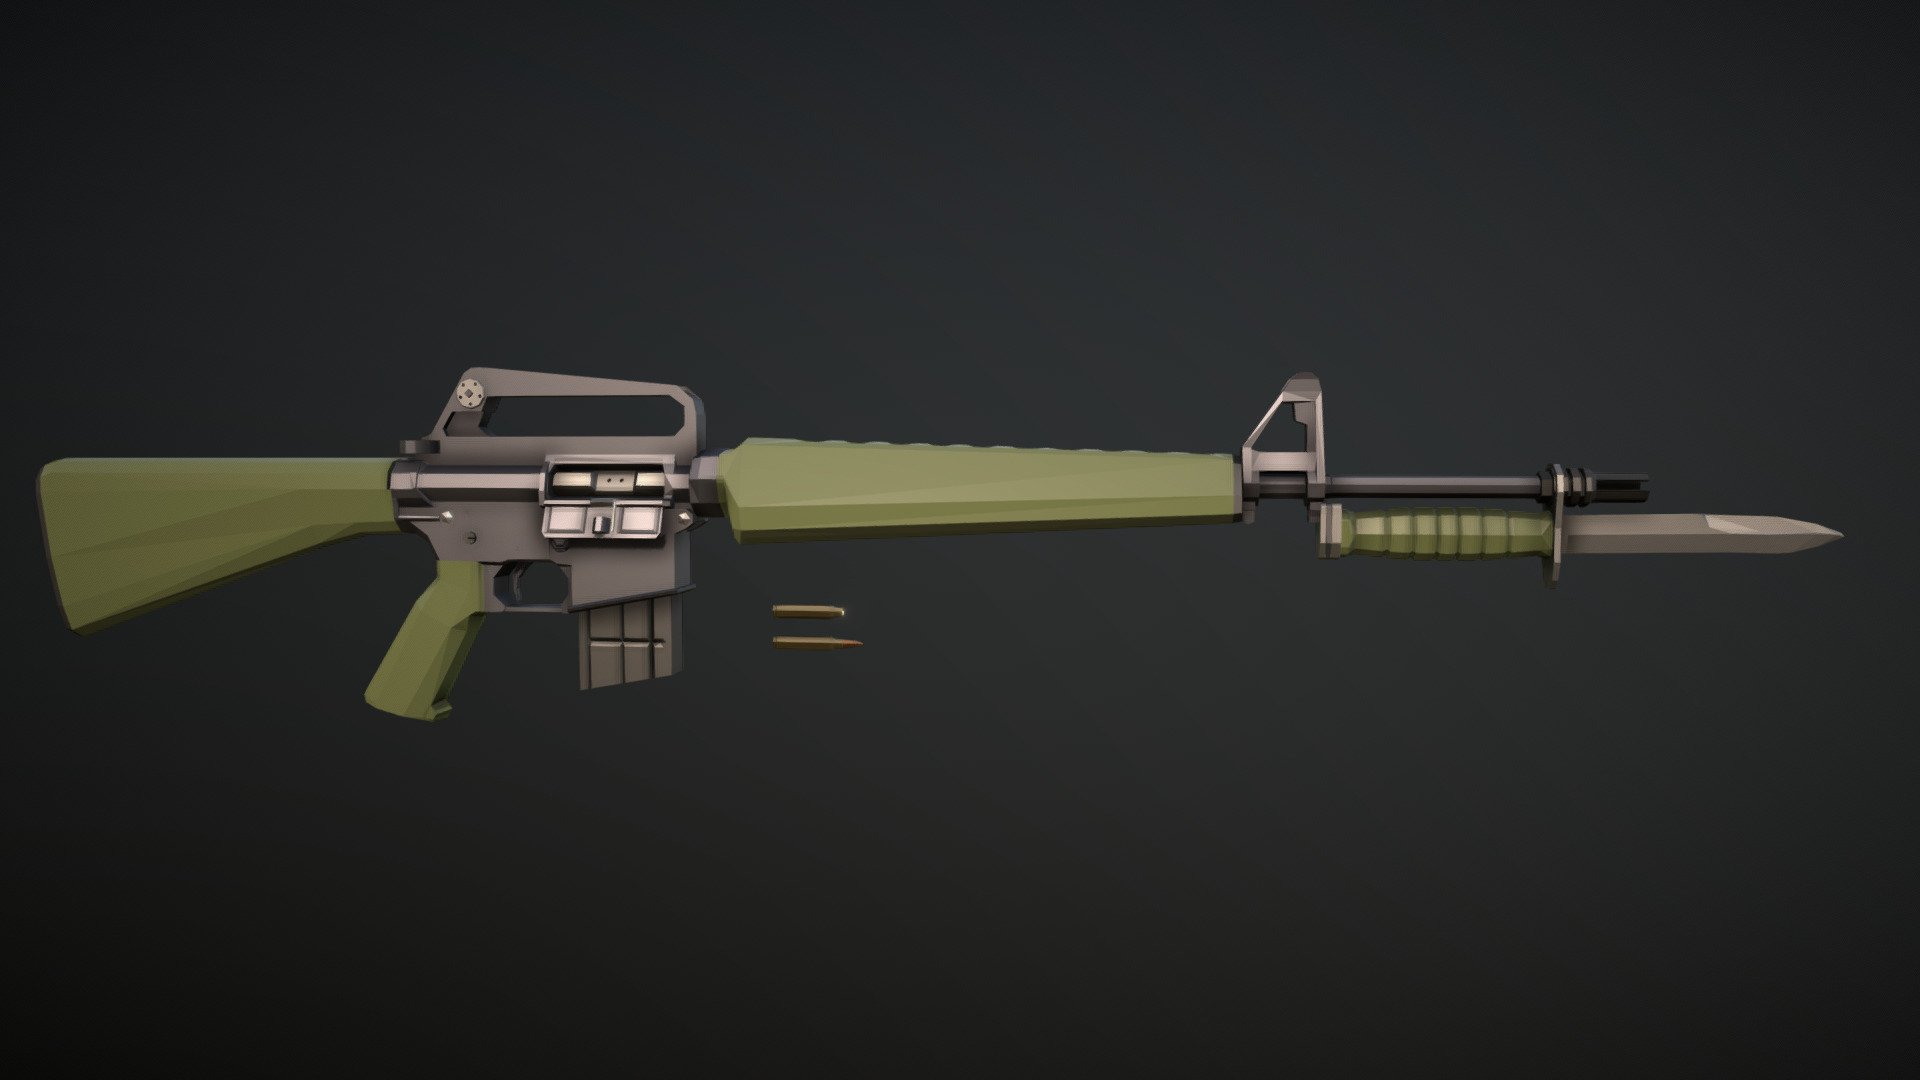 low-poly model of the Colt 601, the first AR-15 variant produced by Colt after buying the rifle and associated patents from Armalite. 

Bayonet, ammo, and early waffle pattern 20 round magazine included.

more guns soon to follow - Low-Poly Colt 601 - Download Free 3D model by notcplkerry 3d model